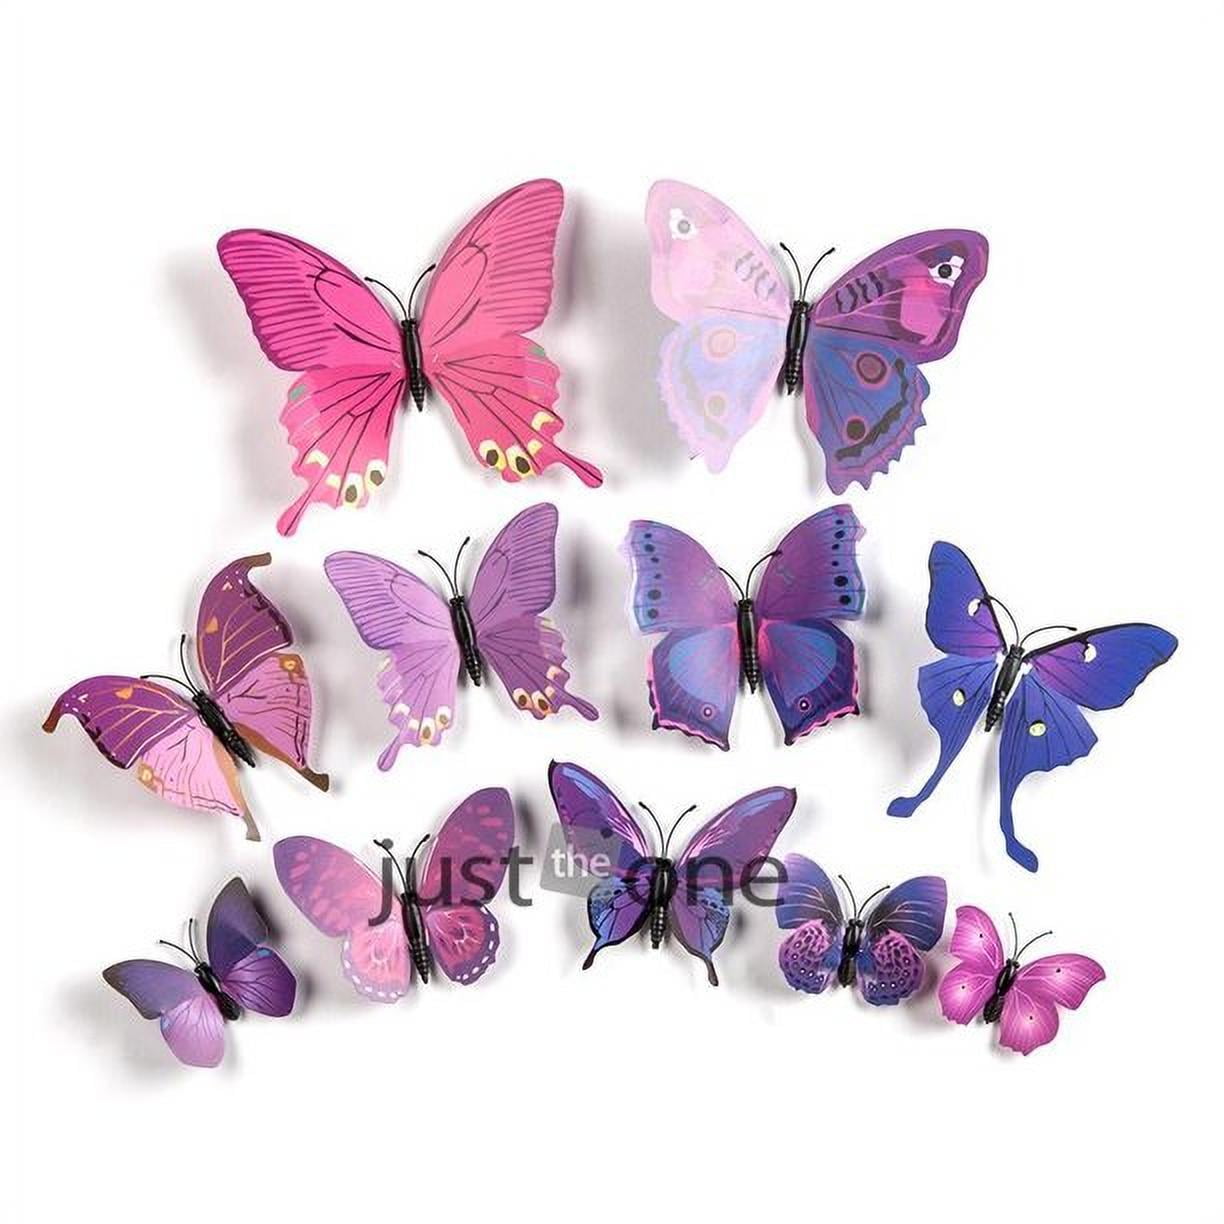 3D Butterfly Decor,Butterfly Wall Decor,Butterflies for Crafts,48 PCS 3D  Butterfly Stickers with Sponge Gum and Pins, Removable Wall Sticker Decals